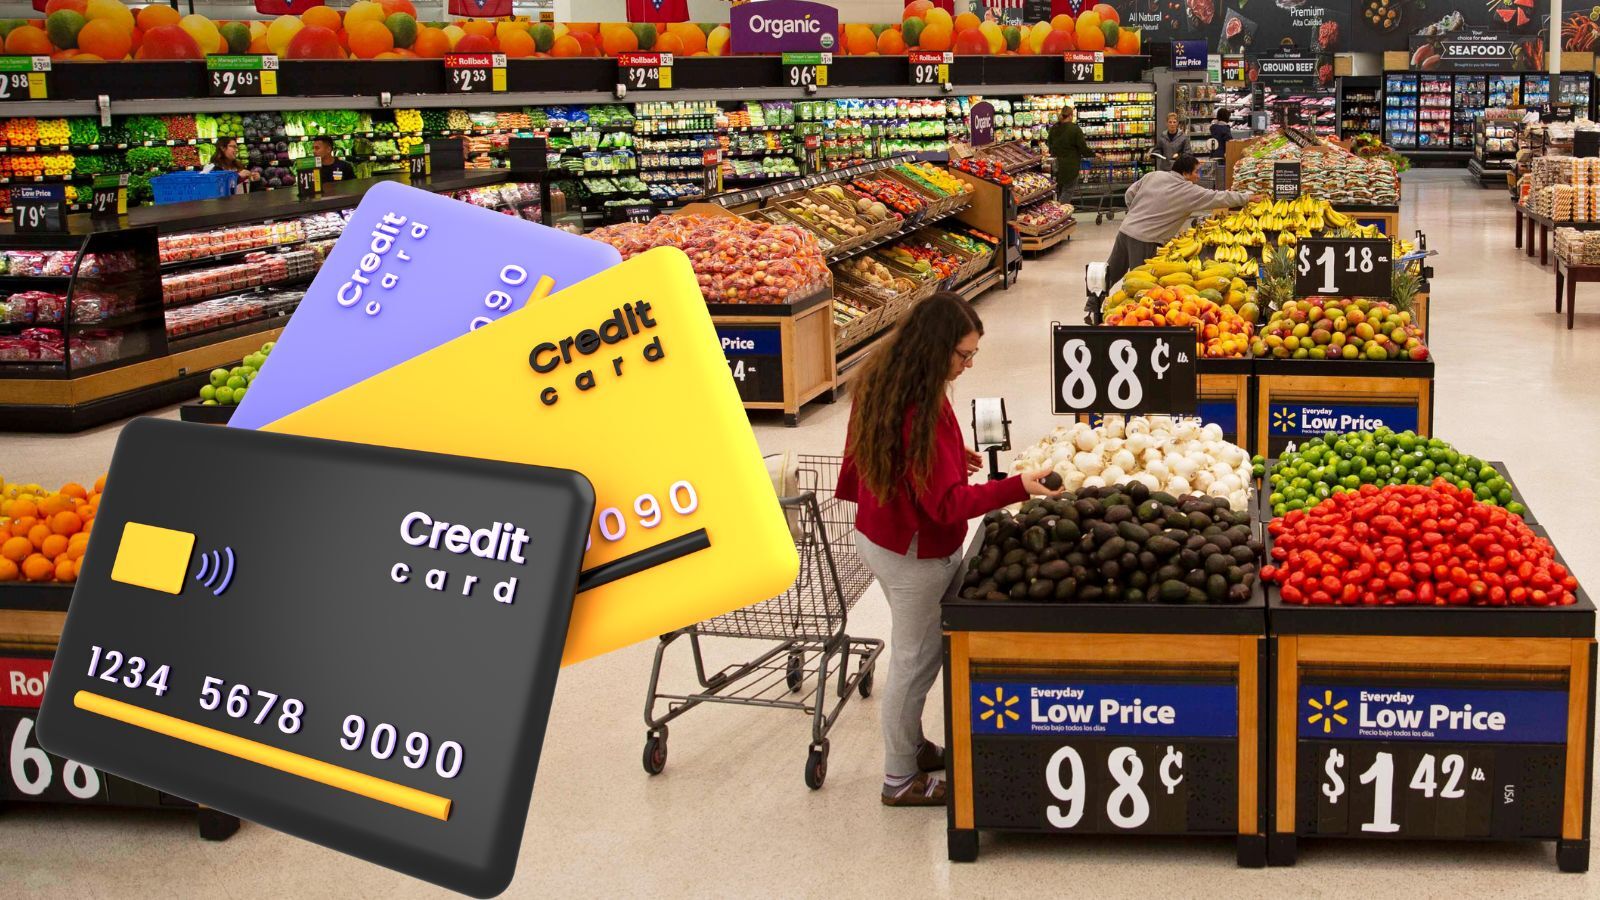 Is Walmart Considered A Grocery Store For Credit Cards?